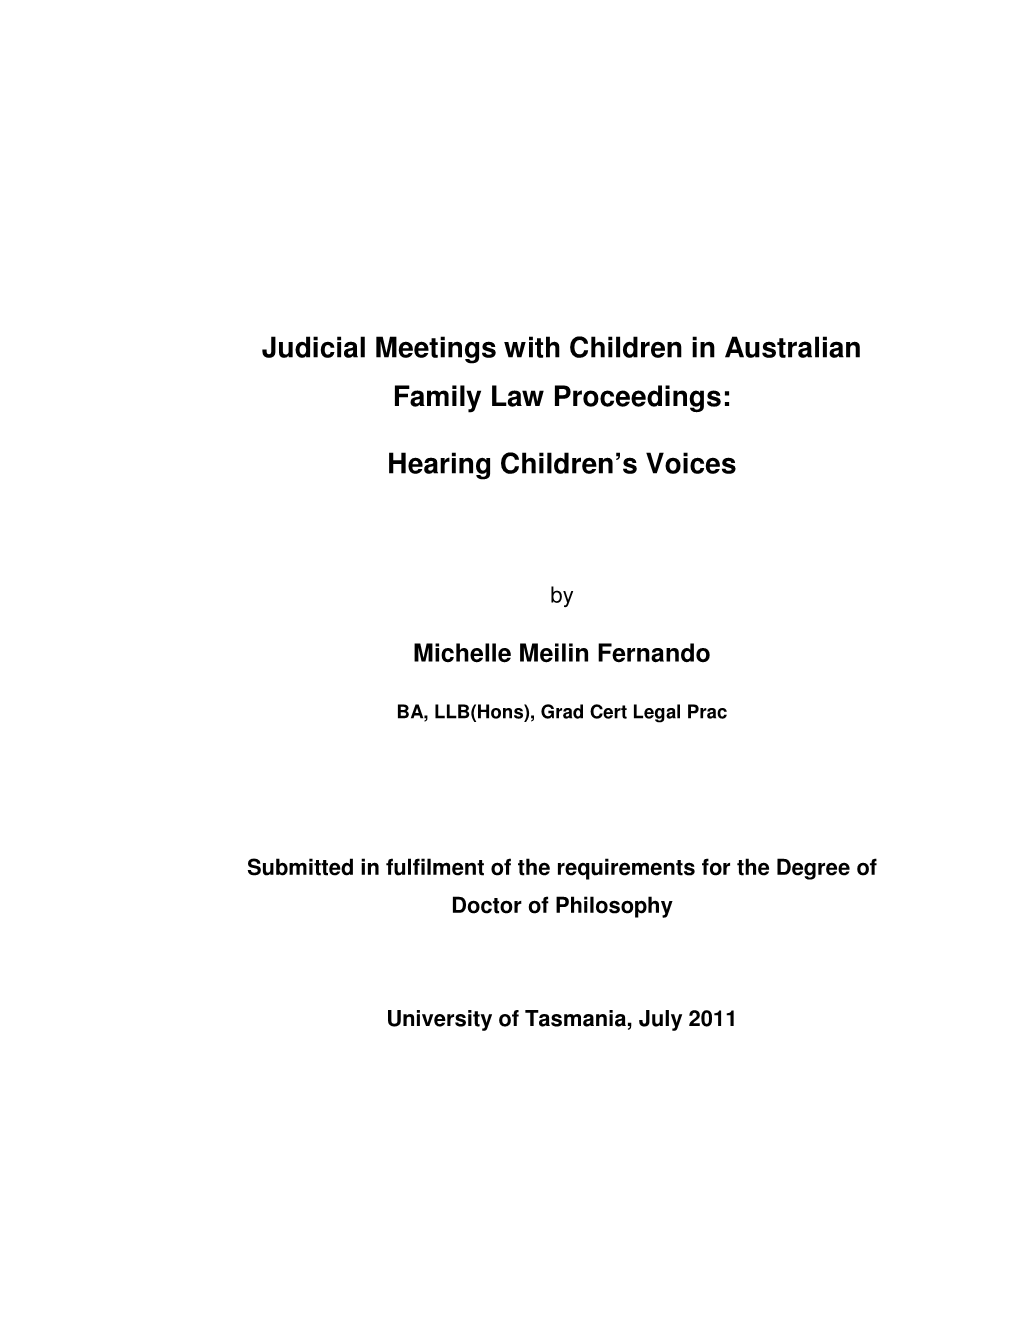 Judicial Meetings with Children in Australian Family Law Proceedings